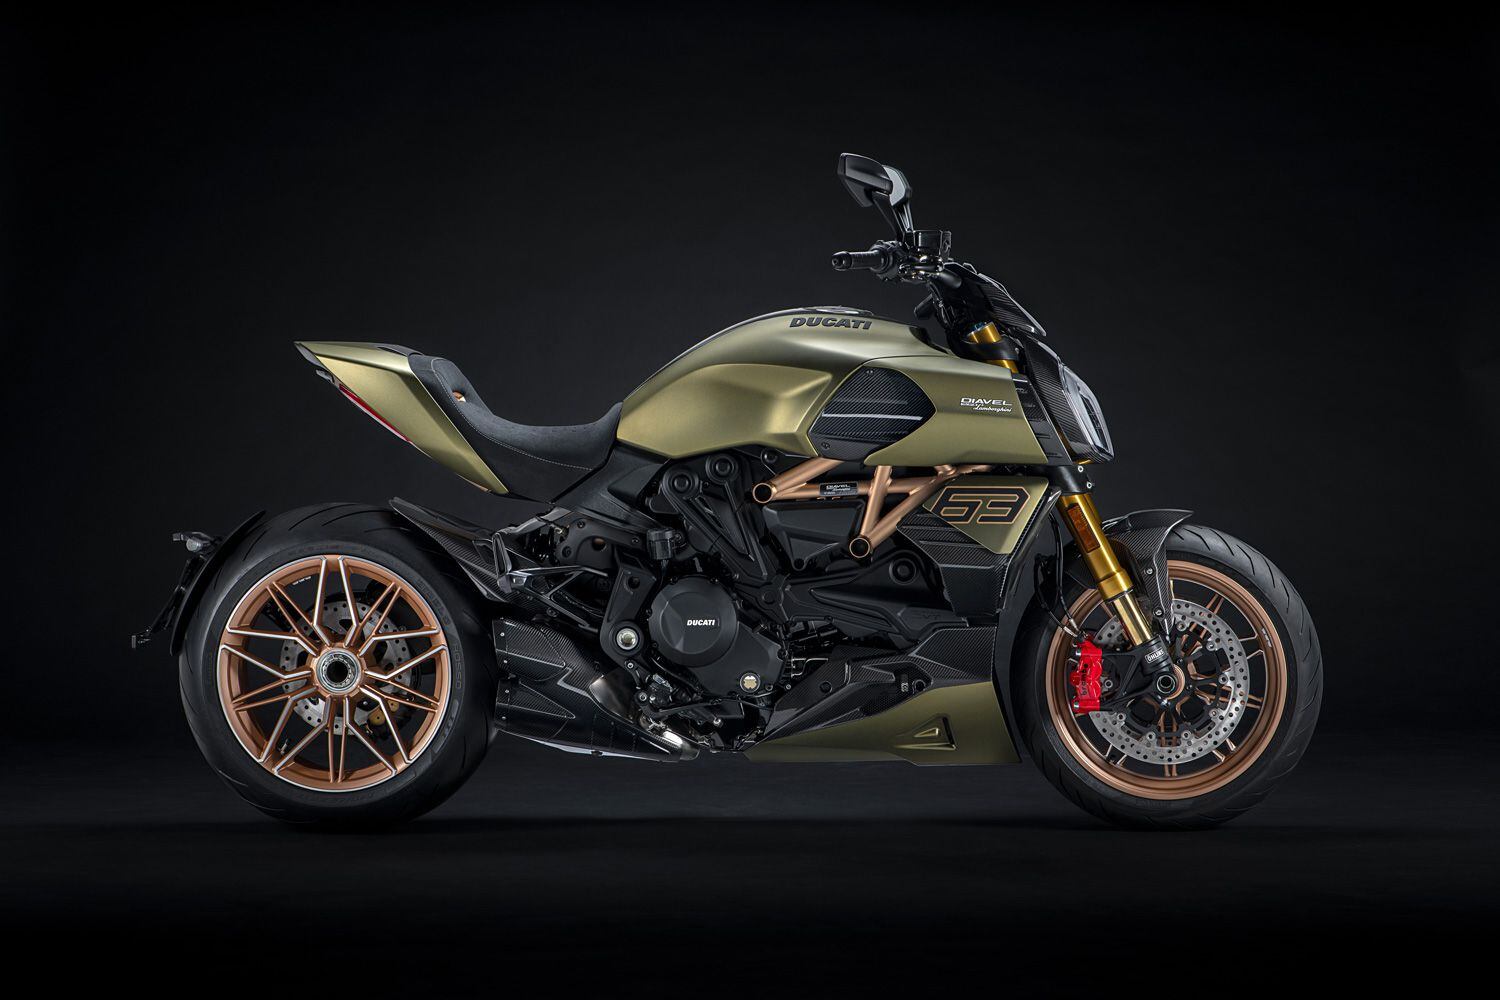 The 2021 Ducati Diavel 1260 Lamborghini is available in only one color: Gea Green with Electrum Gold frame and wheels.